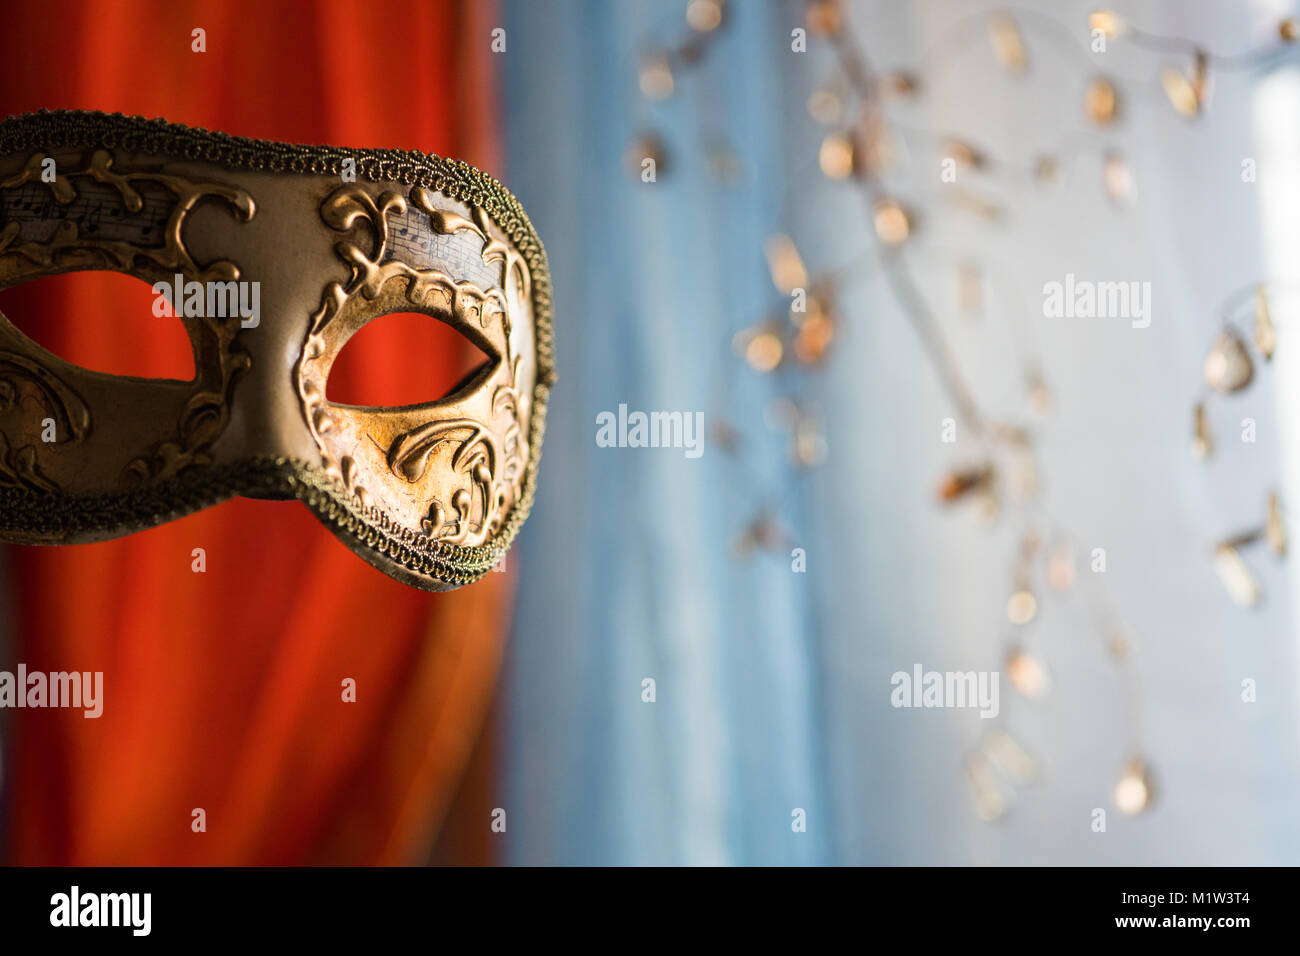 Golden Venetian mask for eyes decorated with music notes written on it Stock Photo